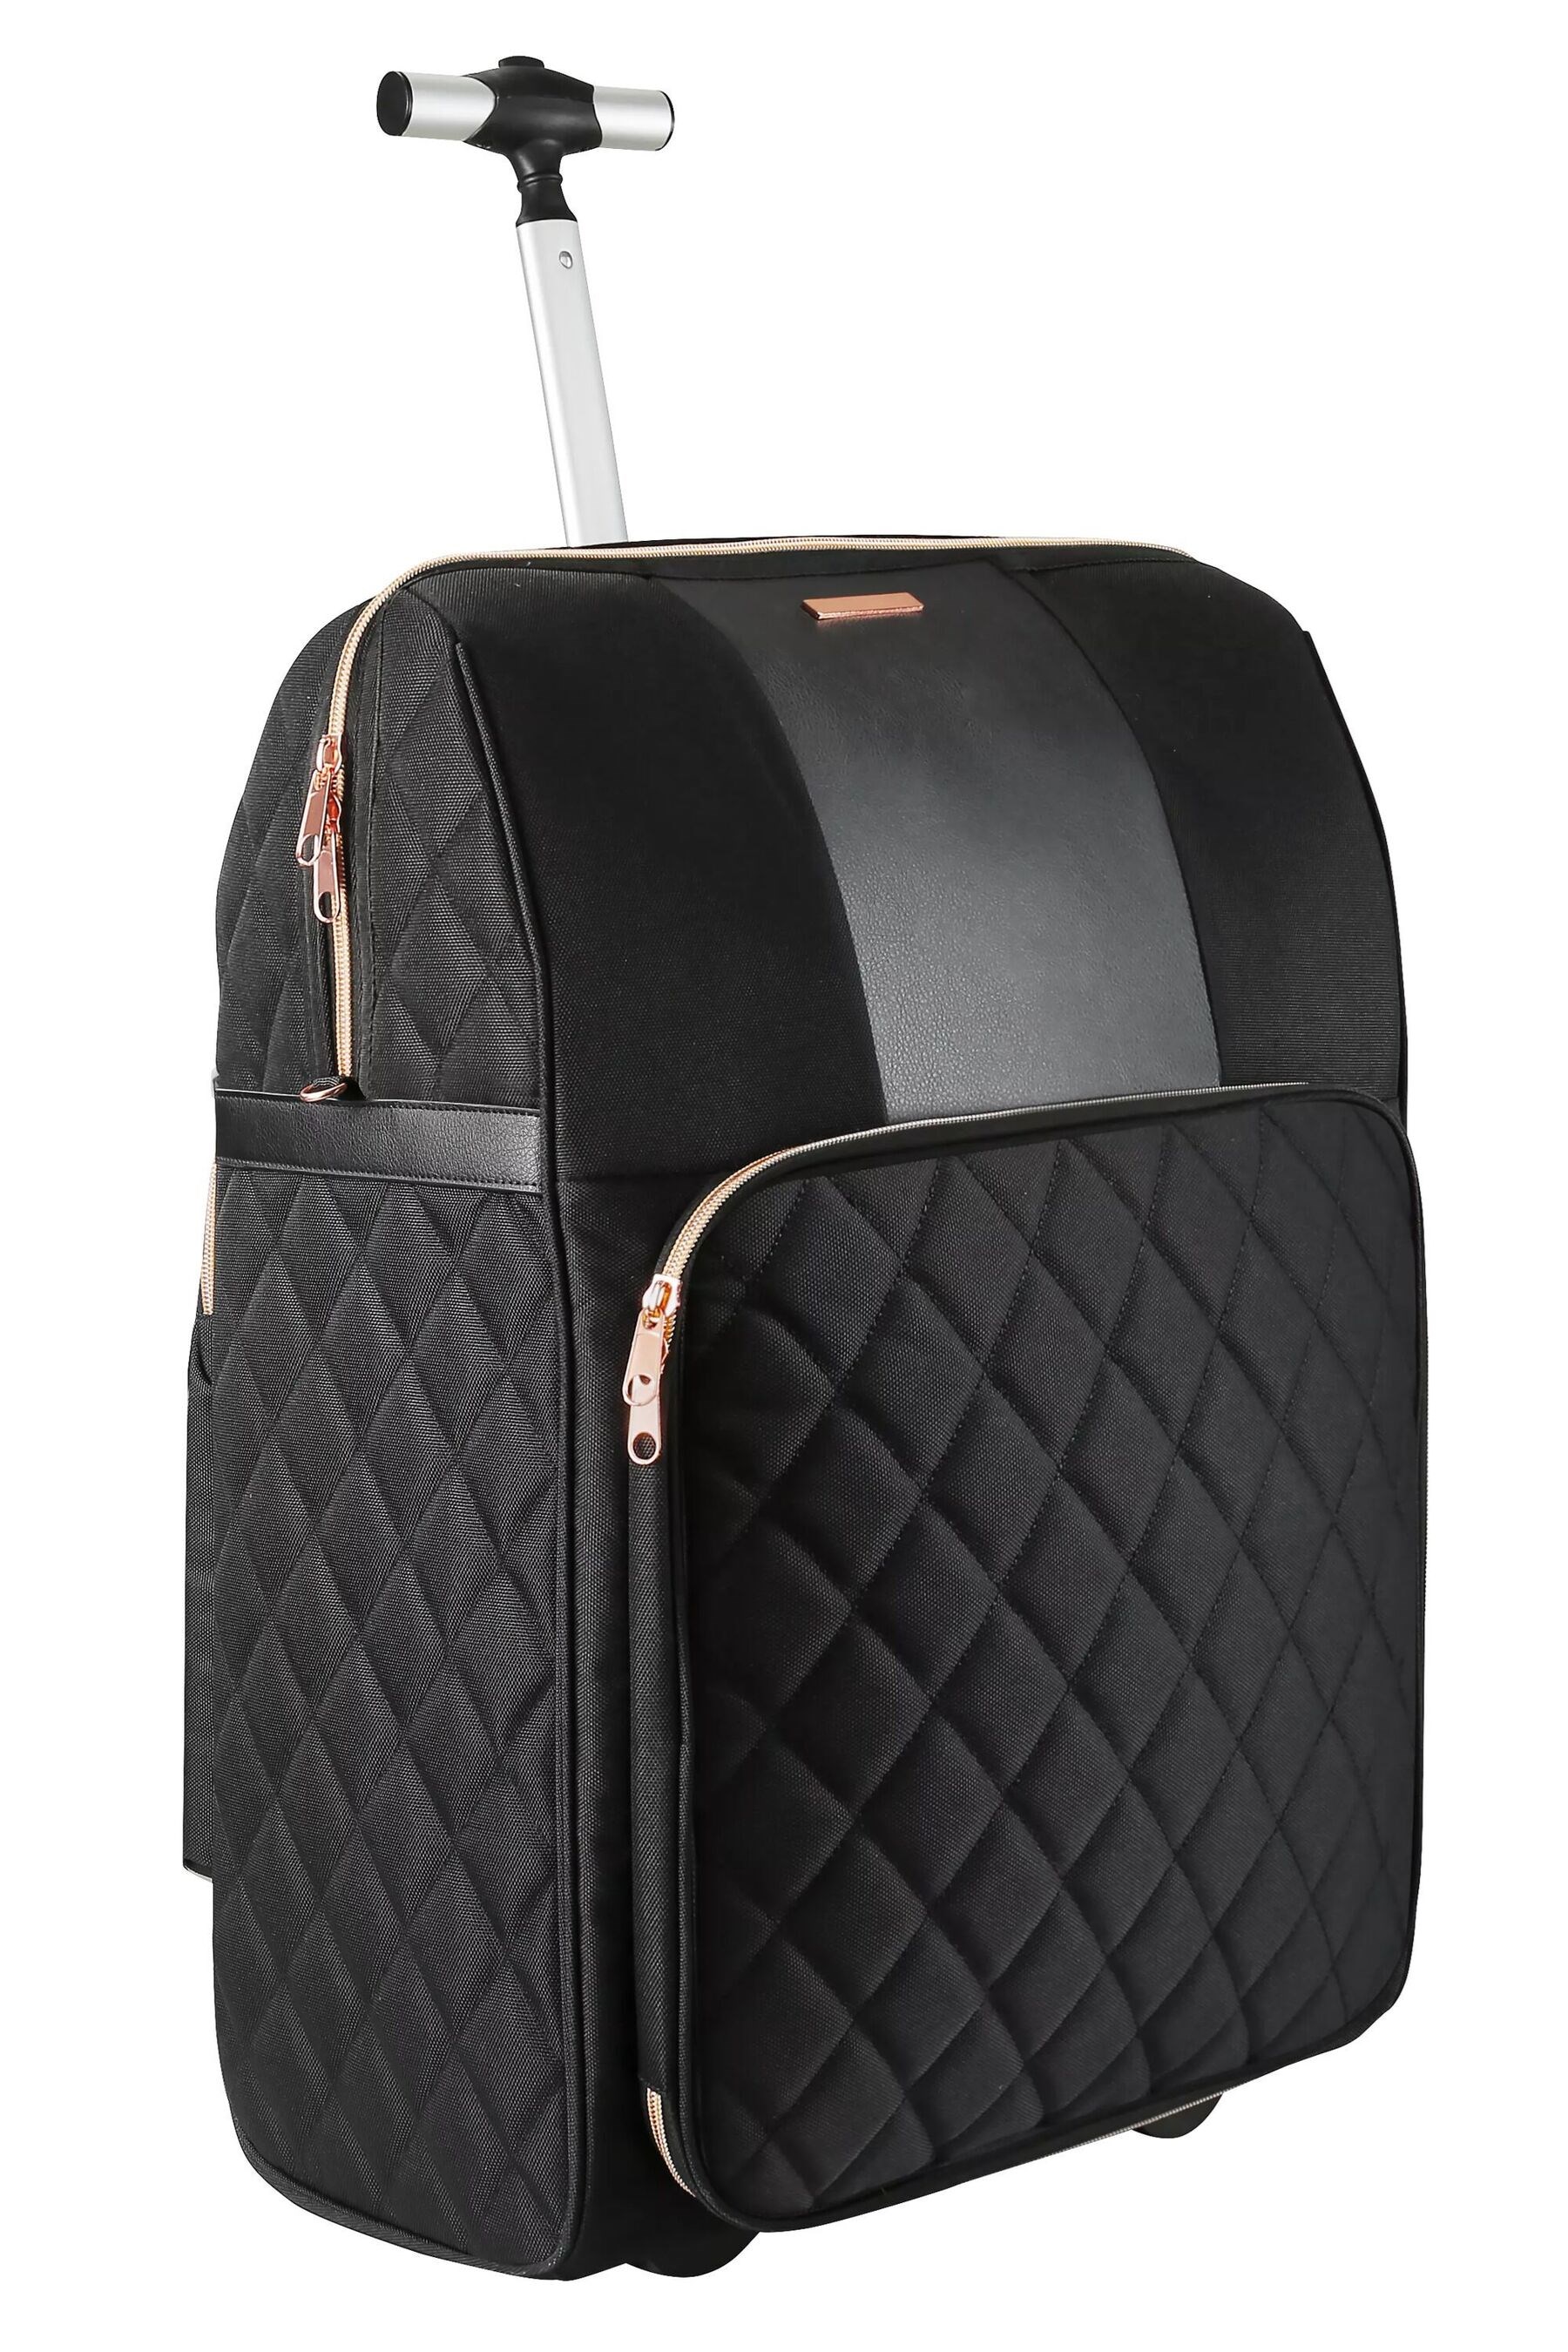 Travel Hack Cabin Case with Hand Bag Compartment -